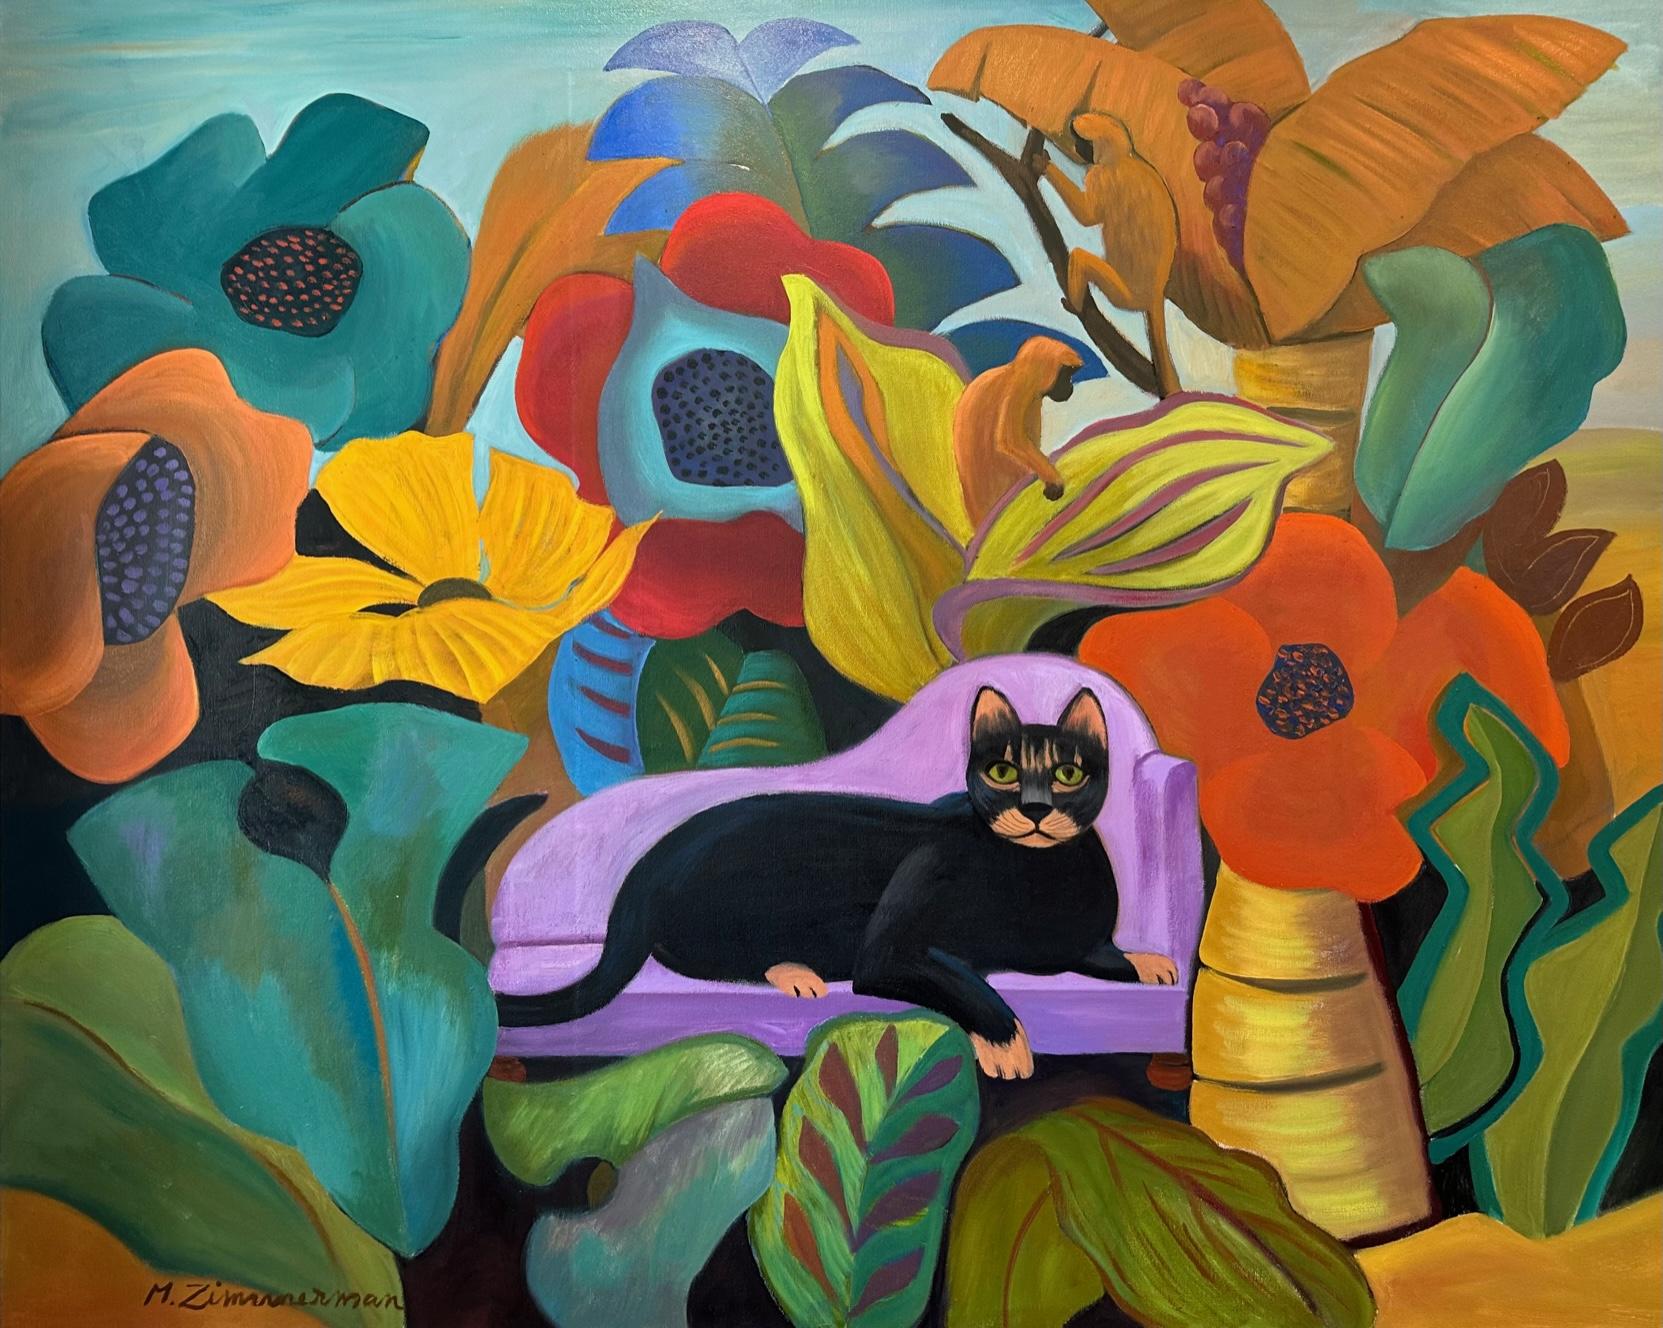 THE PRIMADONNA 2 - Cat in the Jungle, Large Painting By Marc Zimmerman

The painting comes with a certificate of authenticity and a letter of appraisal.

Marc Zimmerman creates playful paintings, whether deep mysterious jungle or delightfully